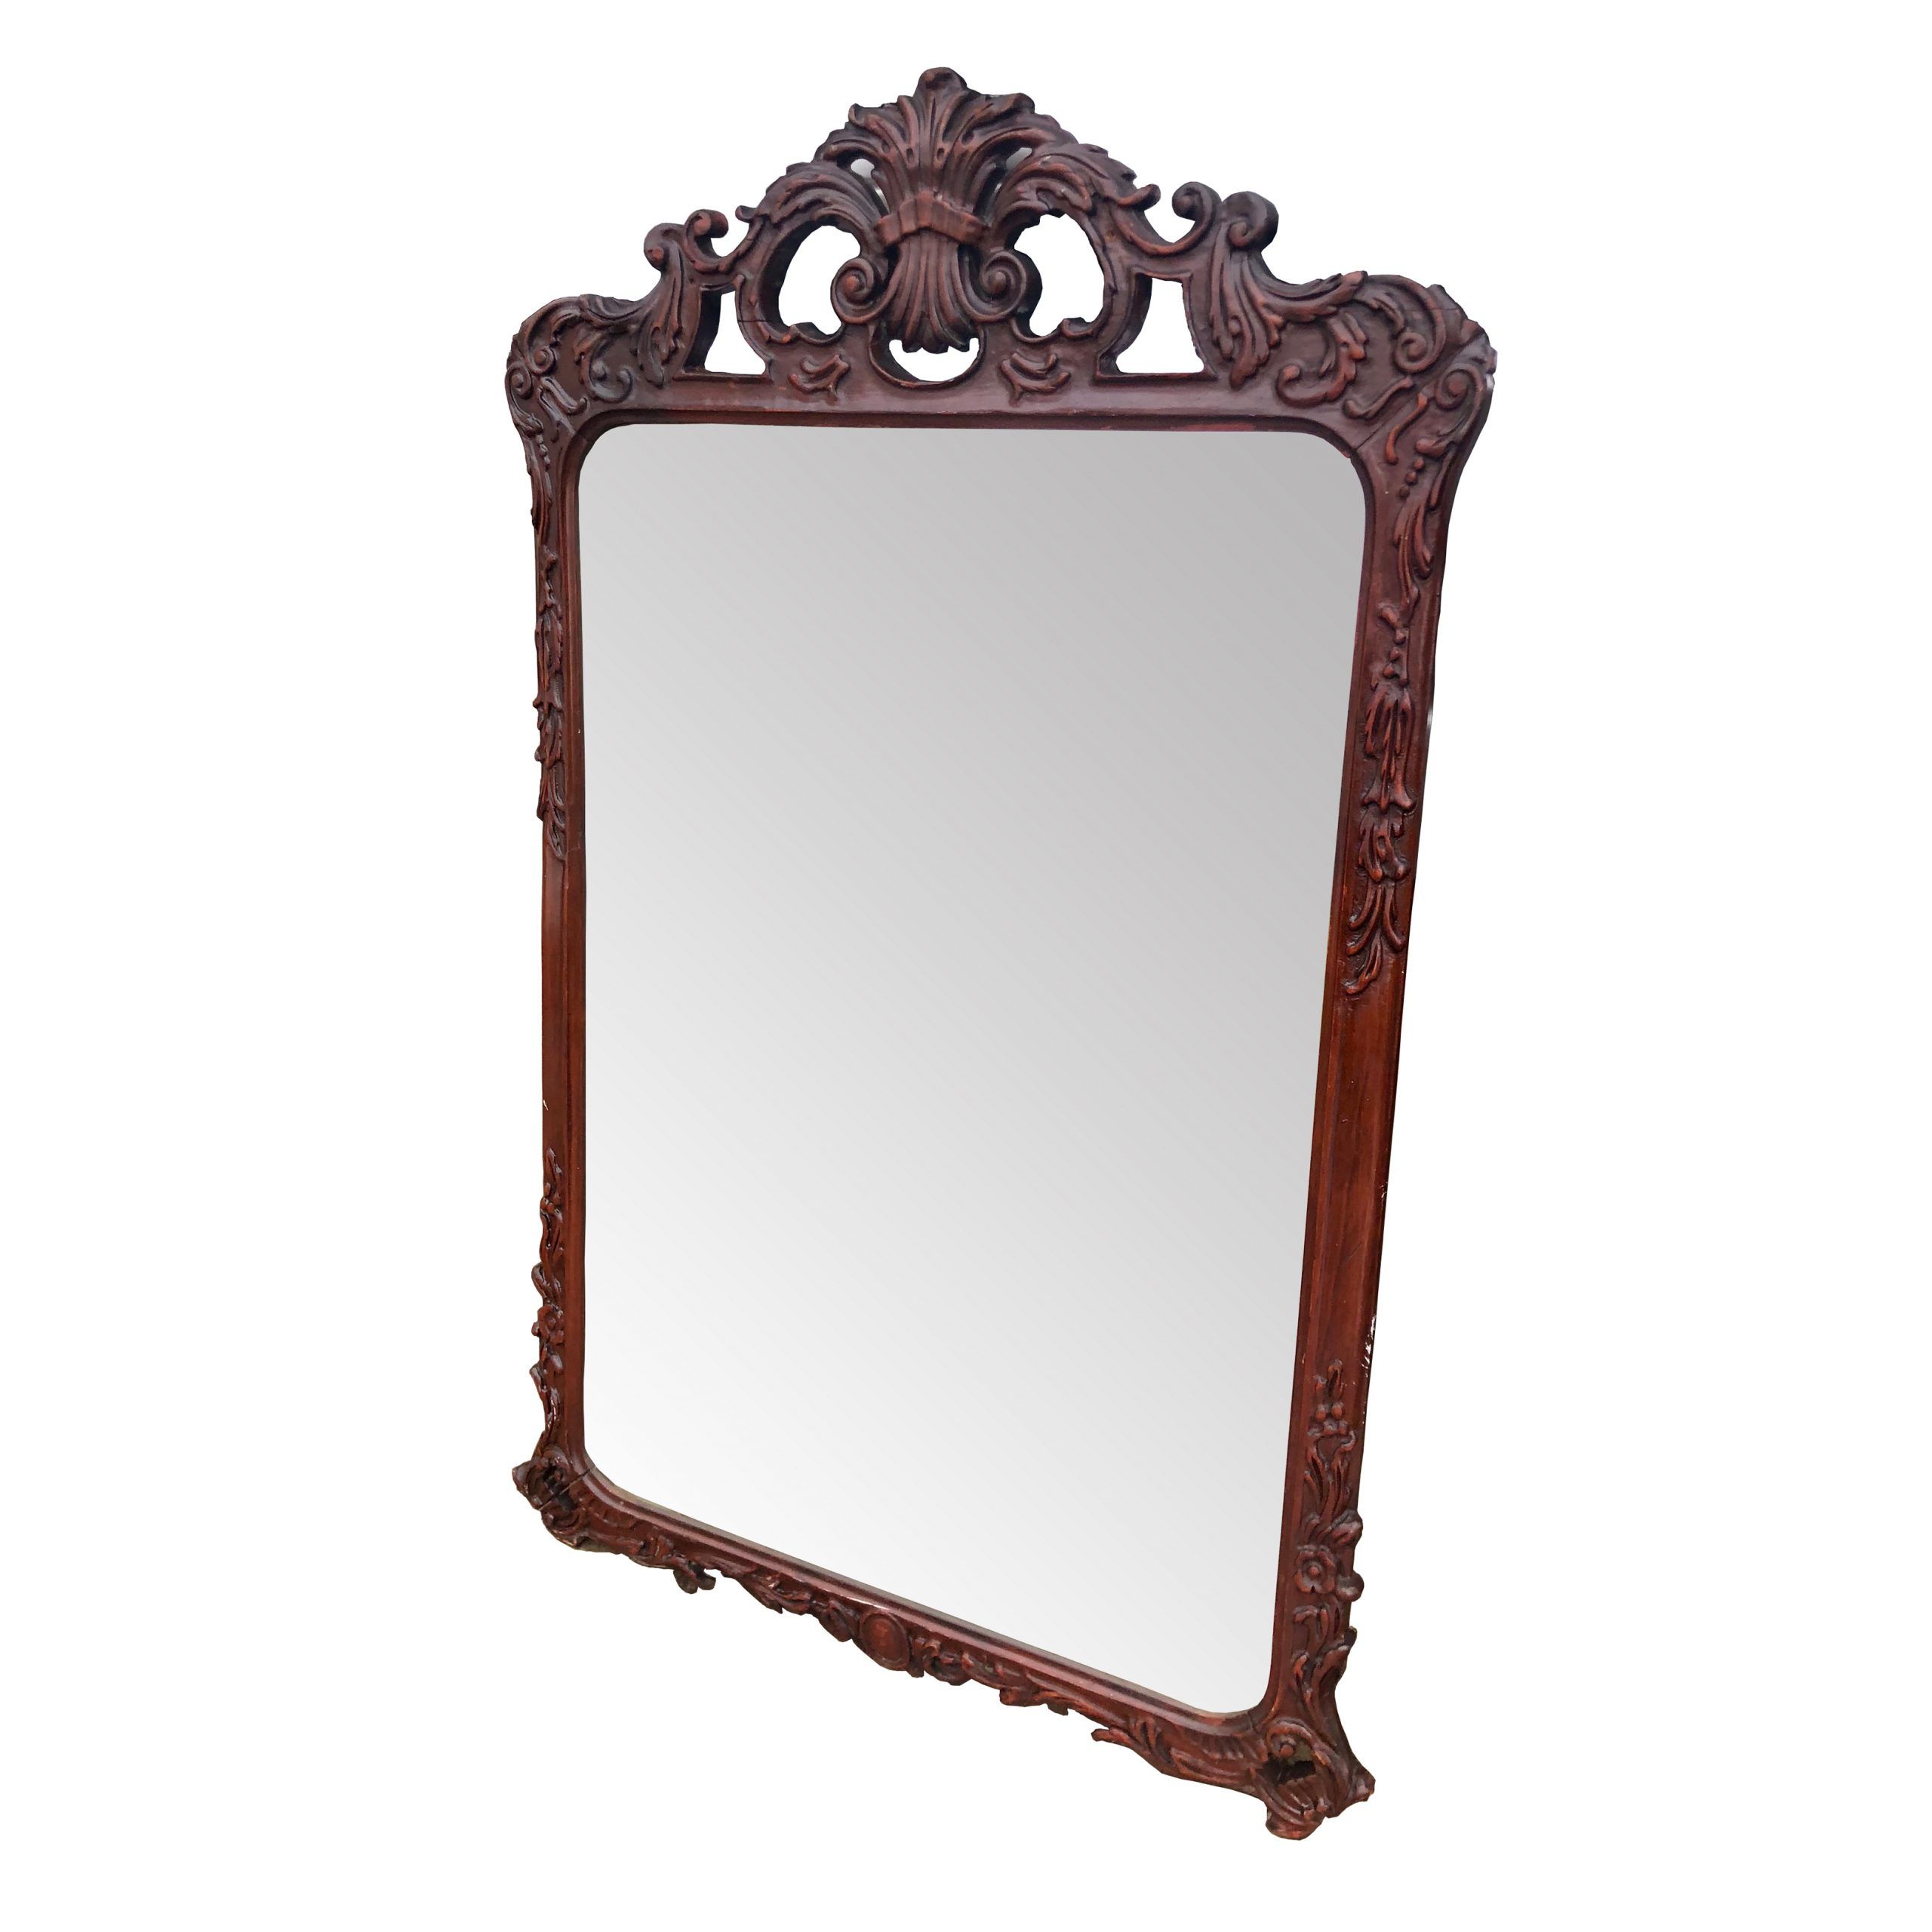 Large Antique Victorian Heavily Carved Walnut Wall Mirror 2x4 Pertaining To Walnut Wall Mirrors (View 1 of 15)